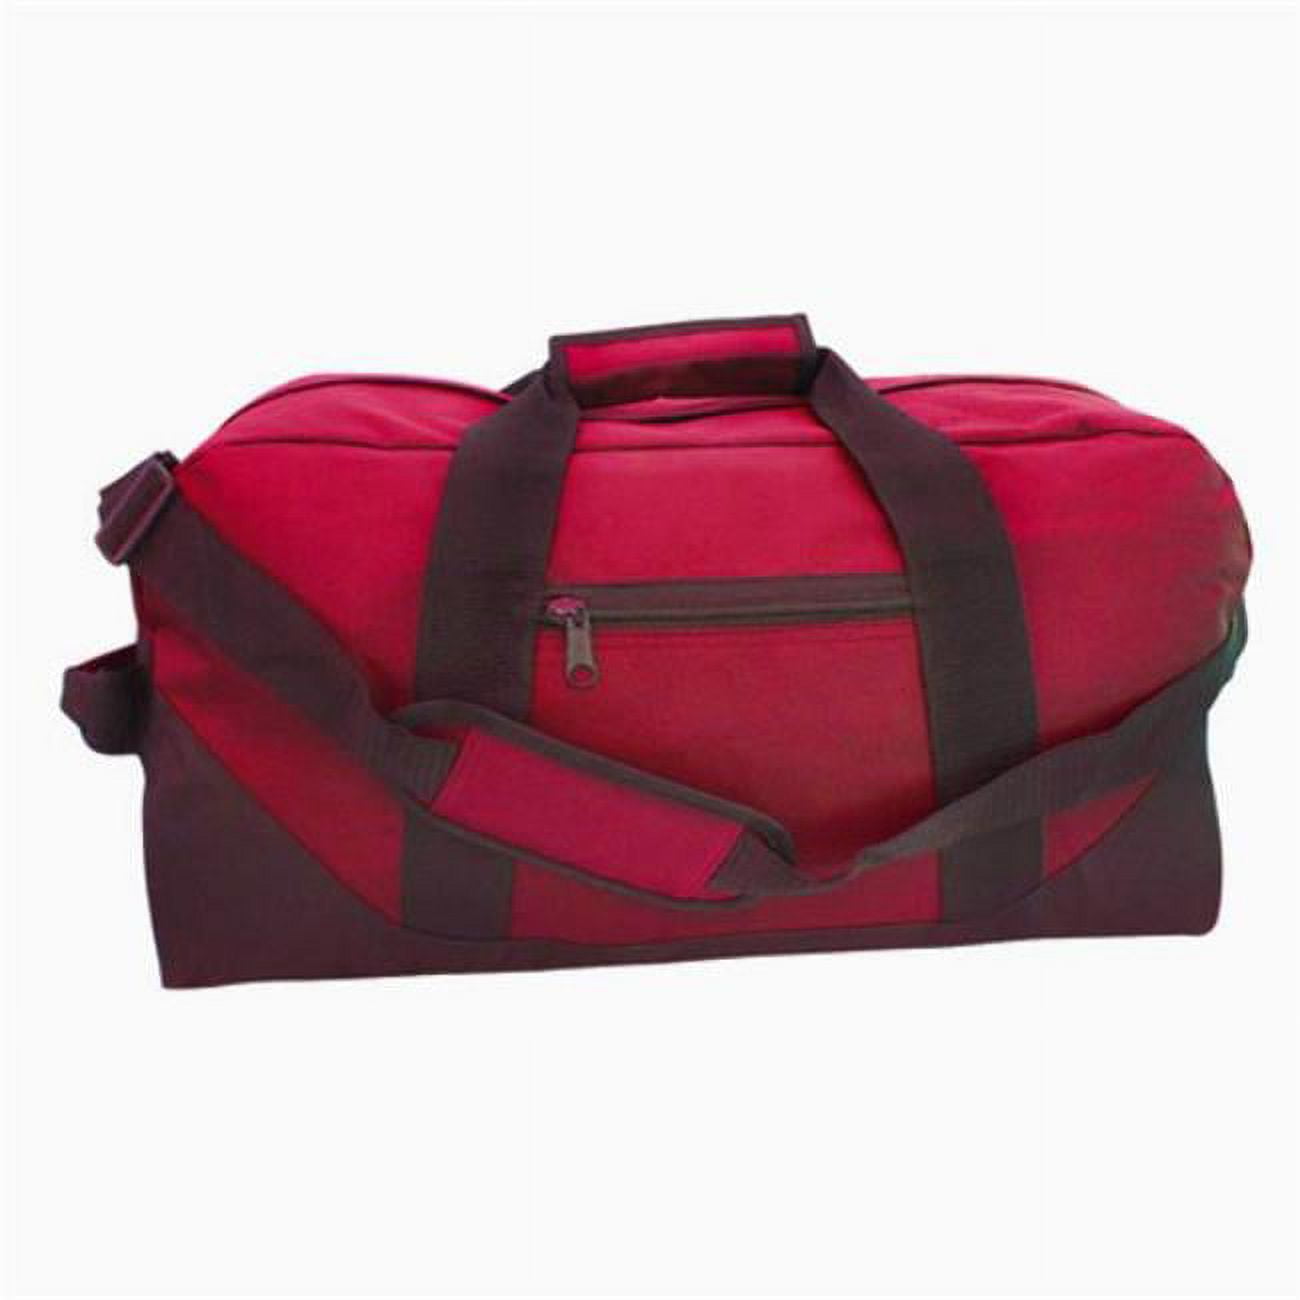 2333761 Two-tone Duffel Bag - Black & Red, Case Of 24